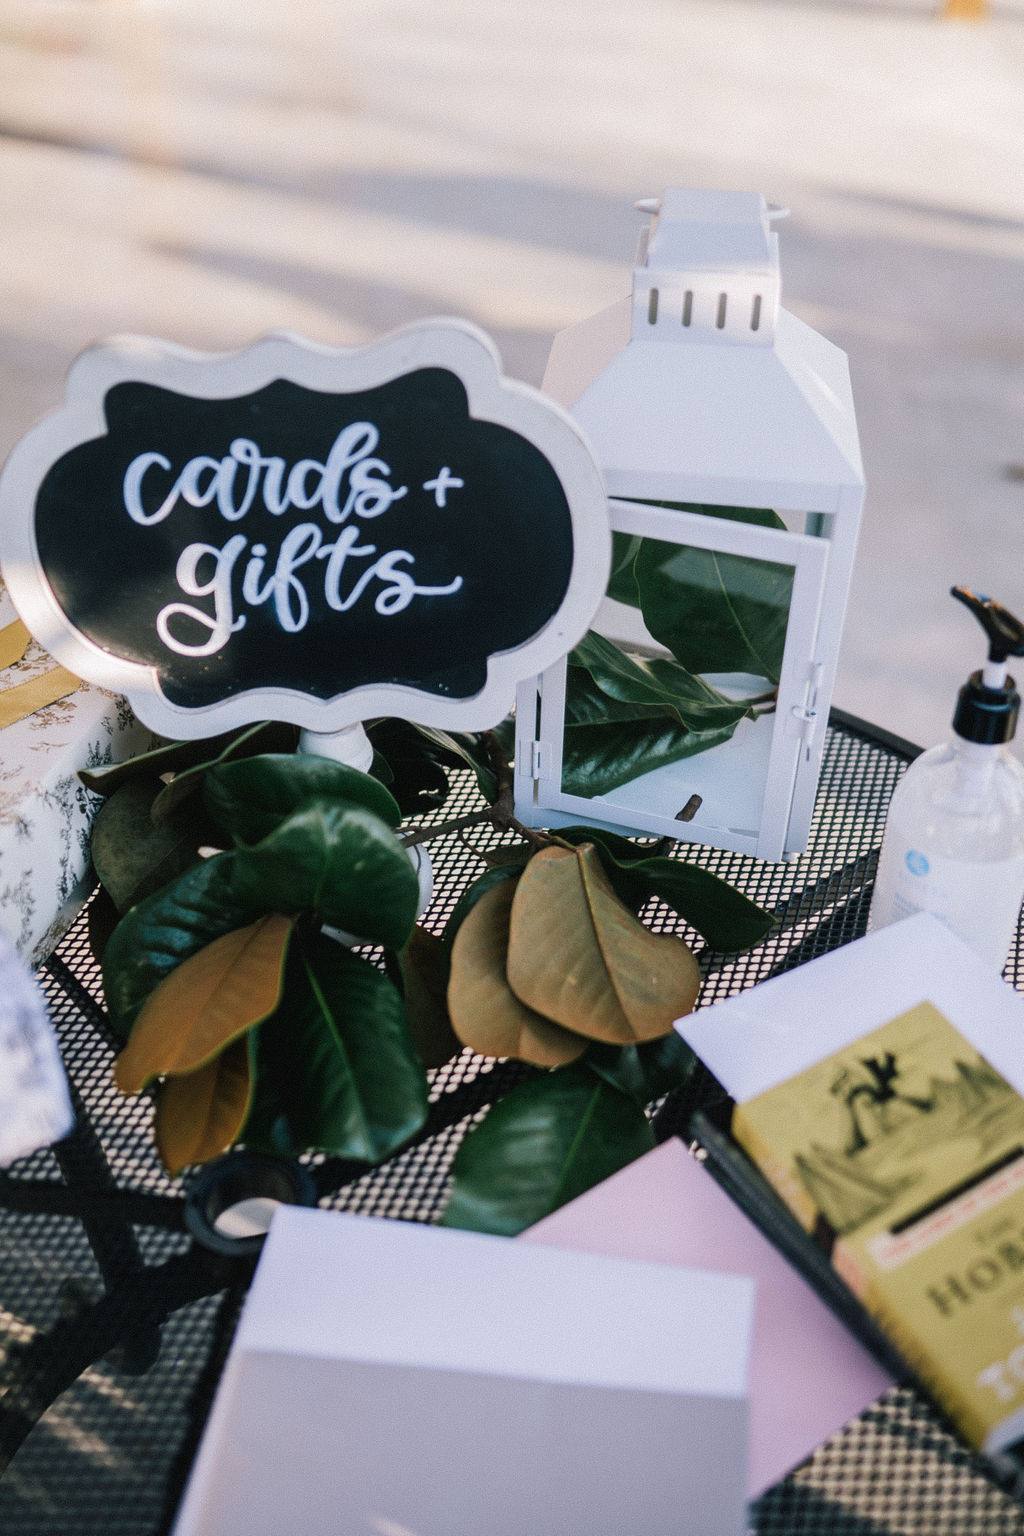 Wedding Photographer Sacramento captures card and gifts table with boho chic decor in knoxville wedding